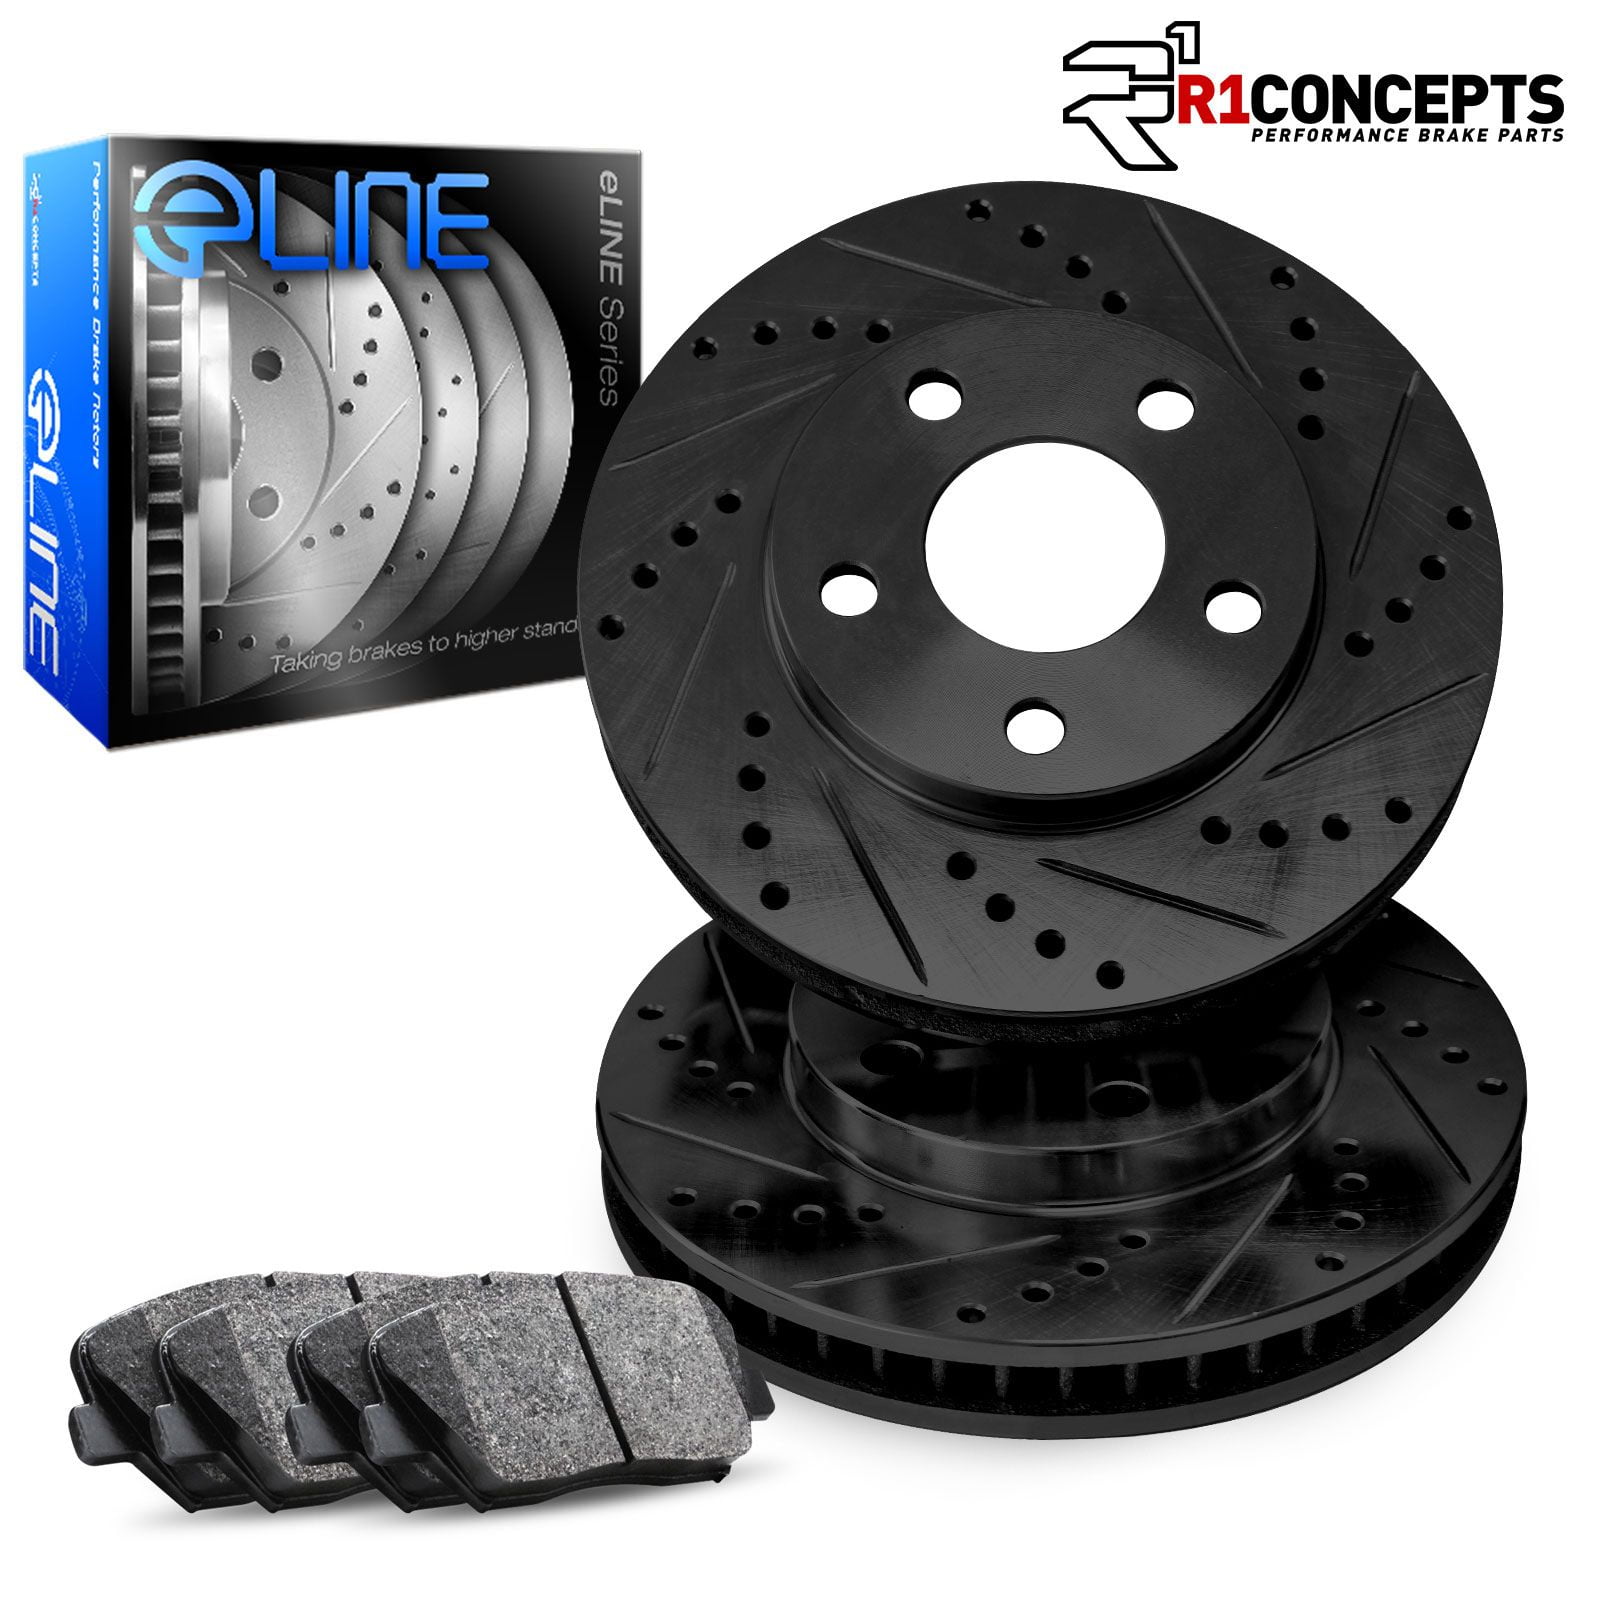 Front &Rear Drilled Slotted Brake Rotors & Ceramic Pads Chevy GMC 2500 3500 HD